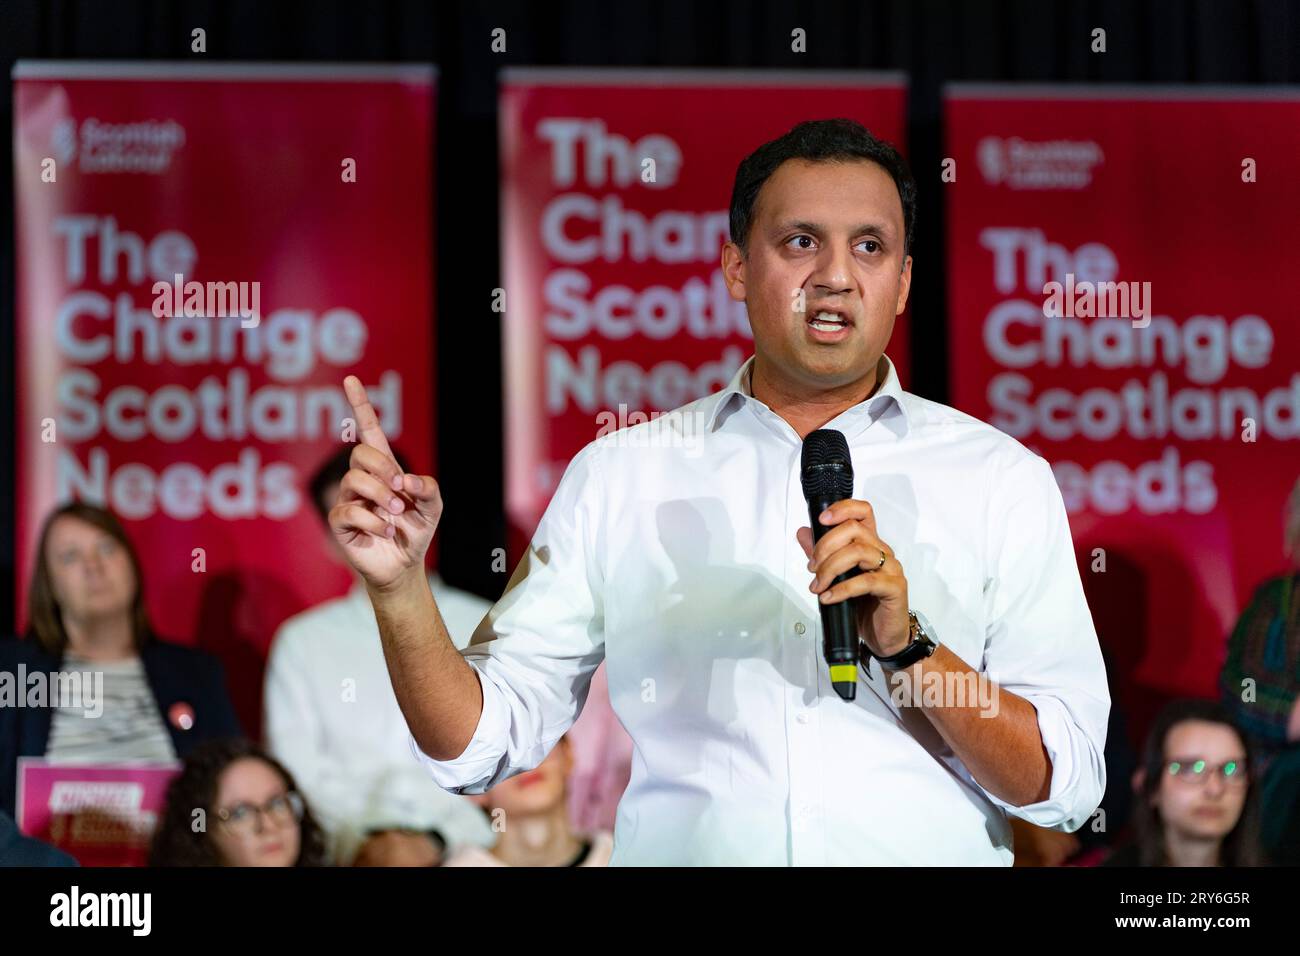 Hamilton, Scotland, UK. 29th September 2023.  Leader of the Labour Party, Sir Keir Starmer, joined Anas Sarwar, Michael Shanks and Jackie Baillie for a Scottish Labour rally ahead of the Rutherglen and Hamilton West by-election next week. The Scottish Labour Party is hoping to take the seat from the SNP.  Pic; Scottish Labour leader Anas Sarwar.  Iain Masterton/Alamy Live News Stock Photo